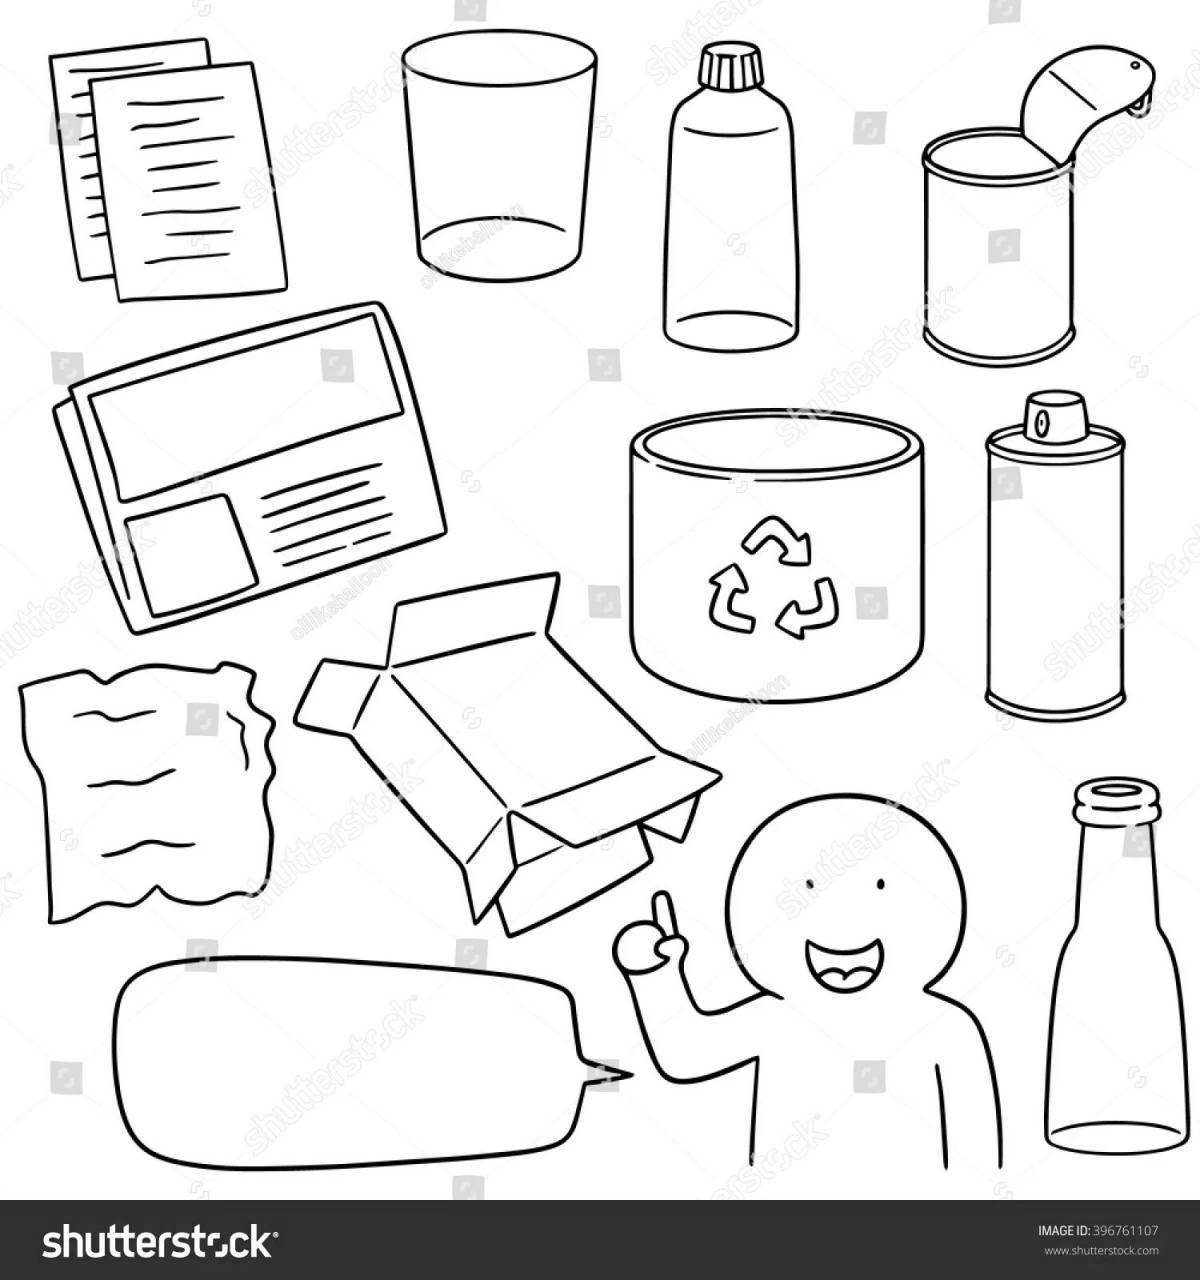 Bright waste sorting coloring page for kids